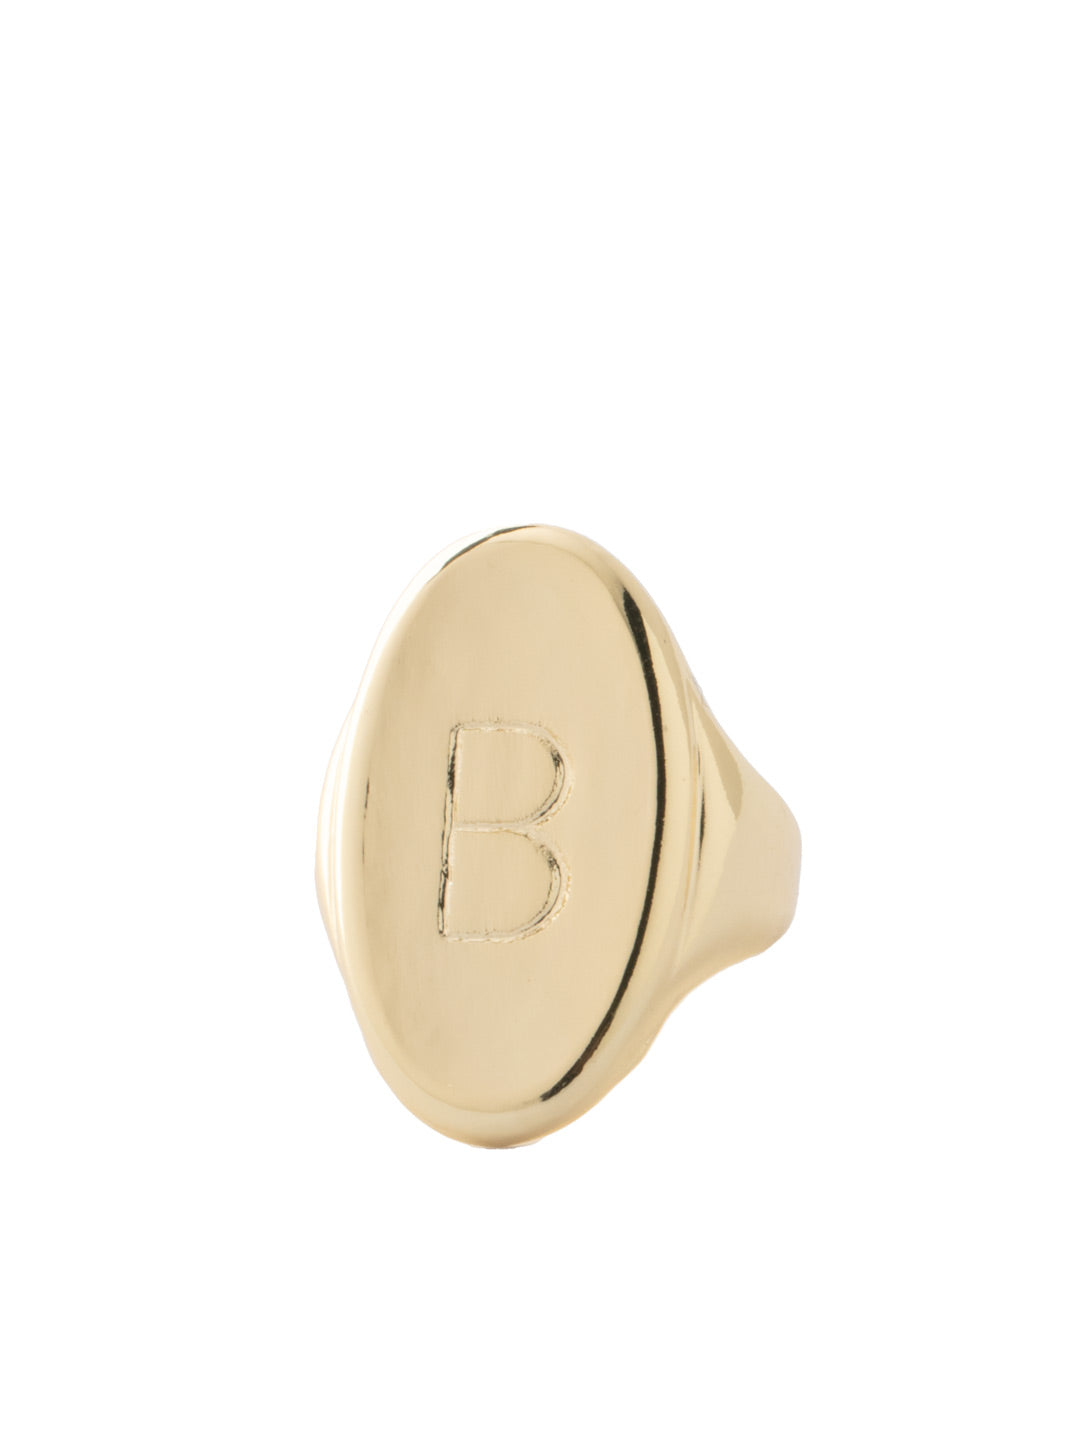 "B" Signet Statement Ring - RFK31BGMTL - <p>The Signet Statement Ring features a capital letter stamped into an oblong metal disk on an adjustable ring band. From Sorrelli's Bare Metallic collection in our Bright Gold-tone finish.</p>